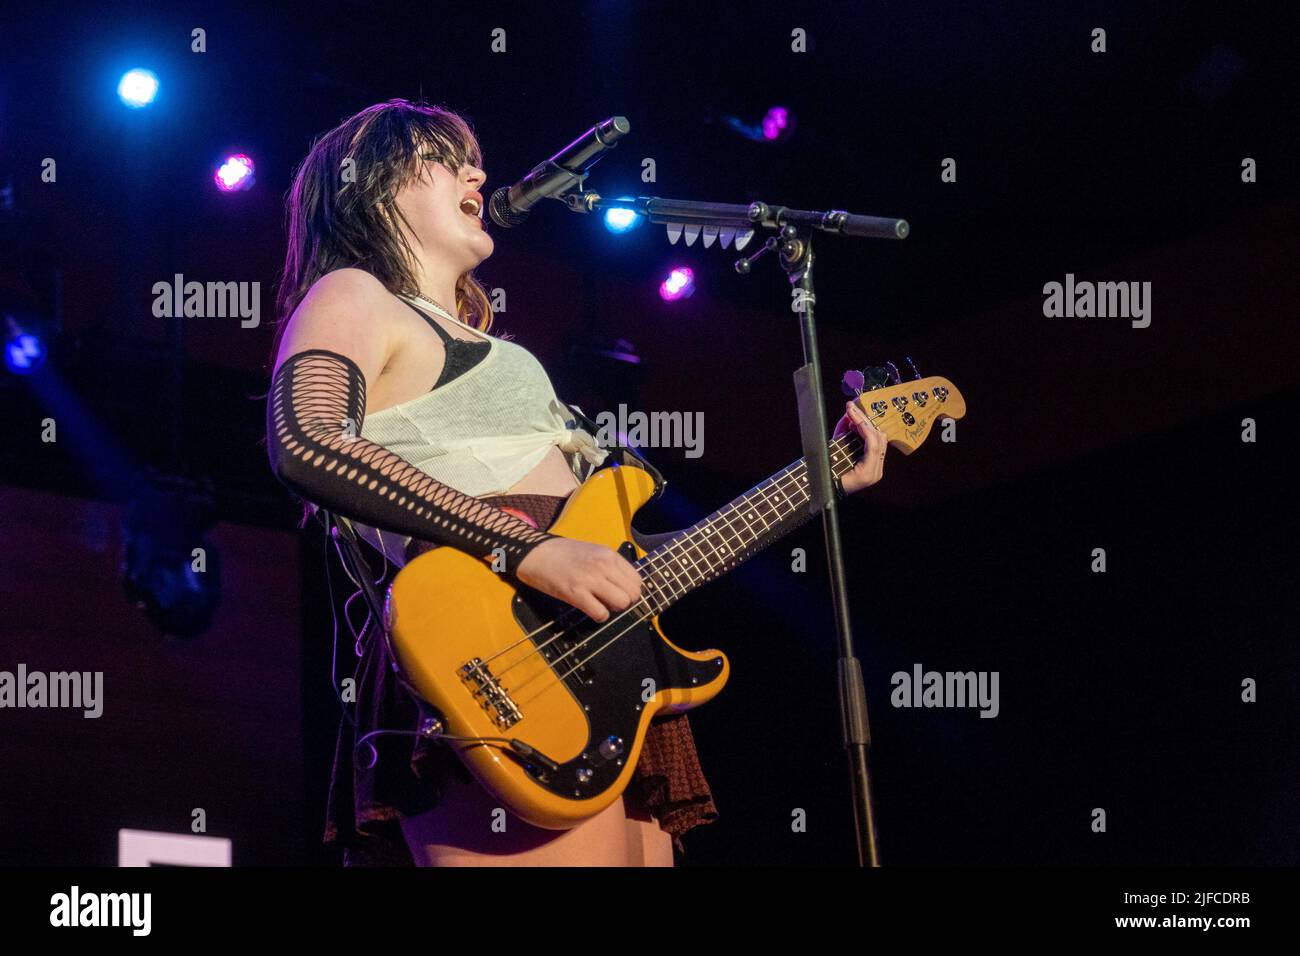 Milwaukee, USA. 30th June, 2022. Musician Gayle (Taylor Gayle Rutherfurd) at Summerfest Music Festival on June 30, 2022, in Milwaukee, Wisconsin (Photo by Daniel DeSlover/Sipa USA) Credit: Sipa USA/Alamy Live News Stock Photo